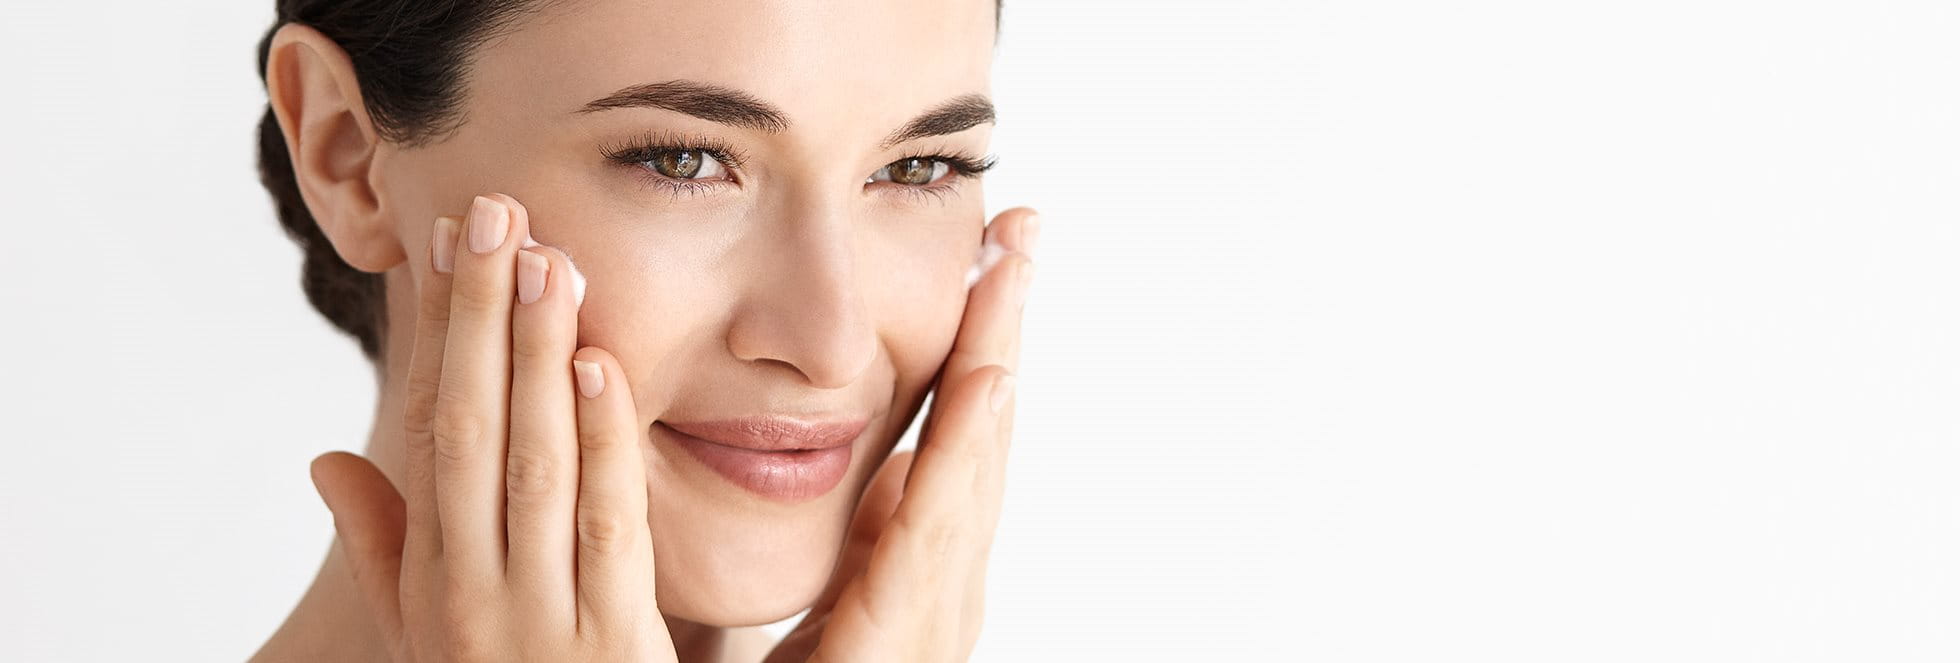 Tips to prevent wrinkles.. Worried about fine lines? Age spots